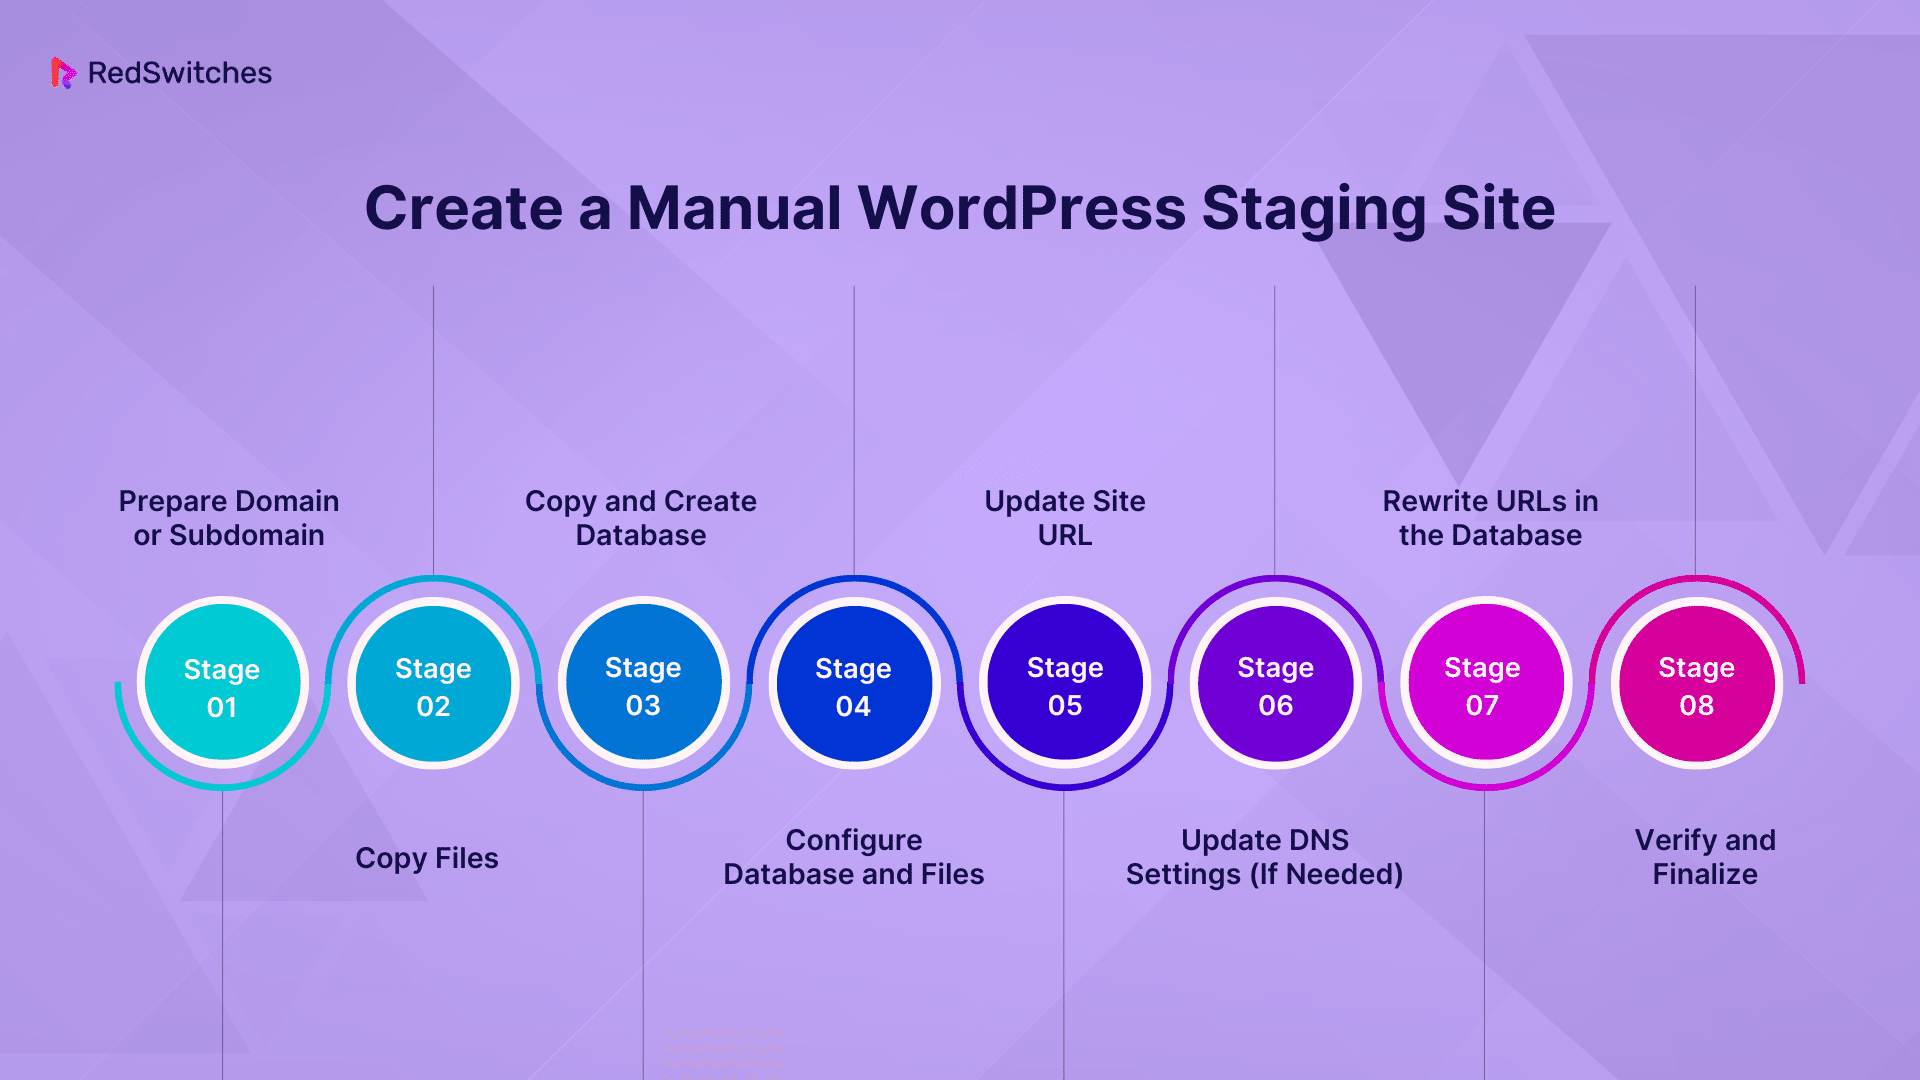 Create a Manual WordPress Staging Site